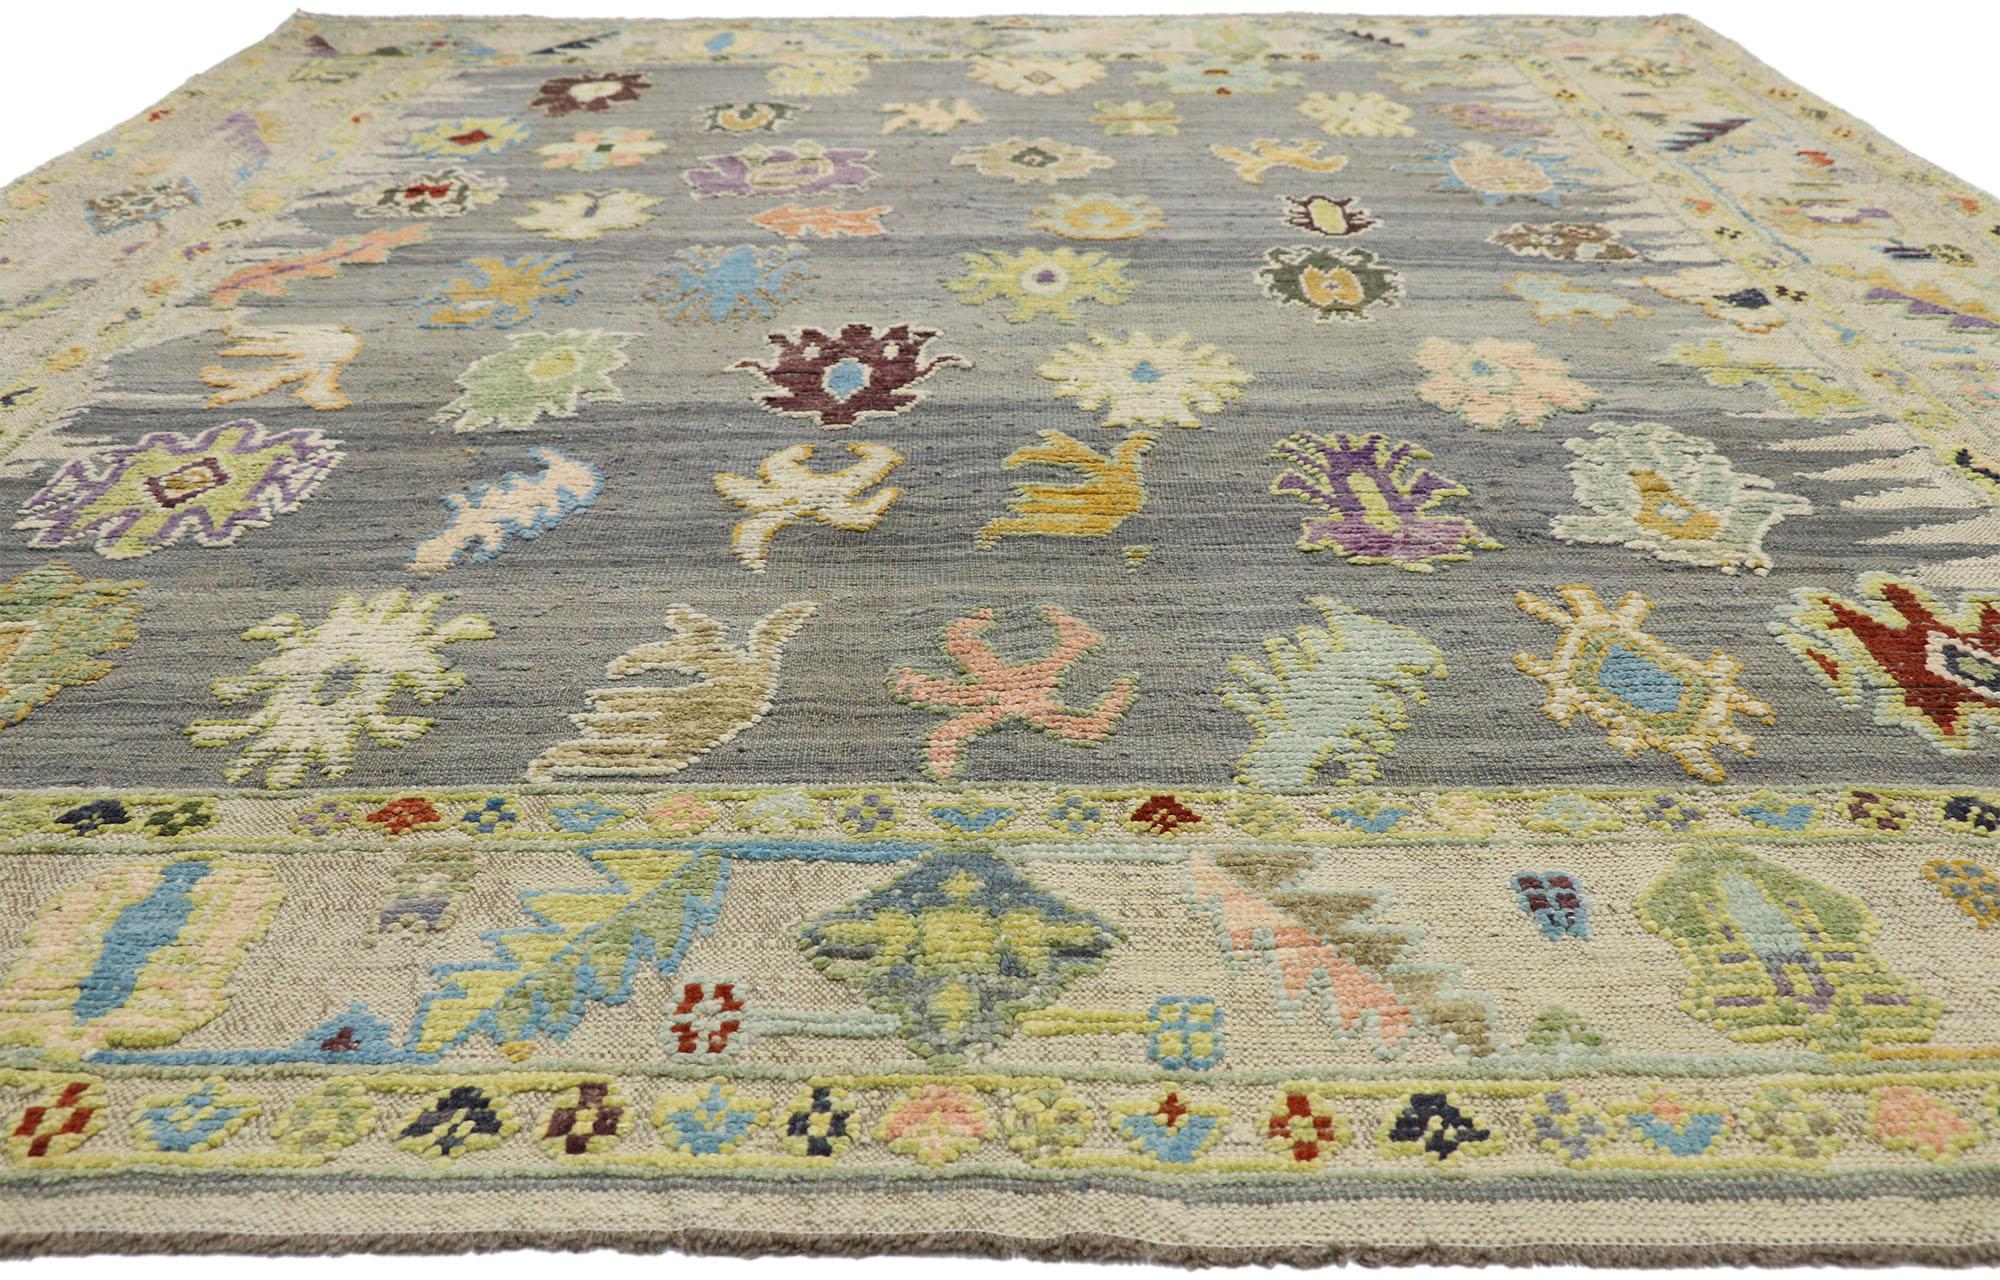 Hand-Knotted Contemporary Turkish Kilim Souf Rug with Pastel Colors and French Style